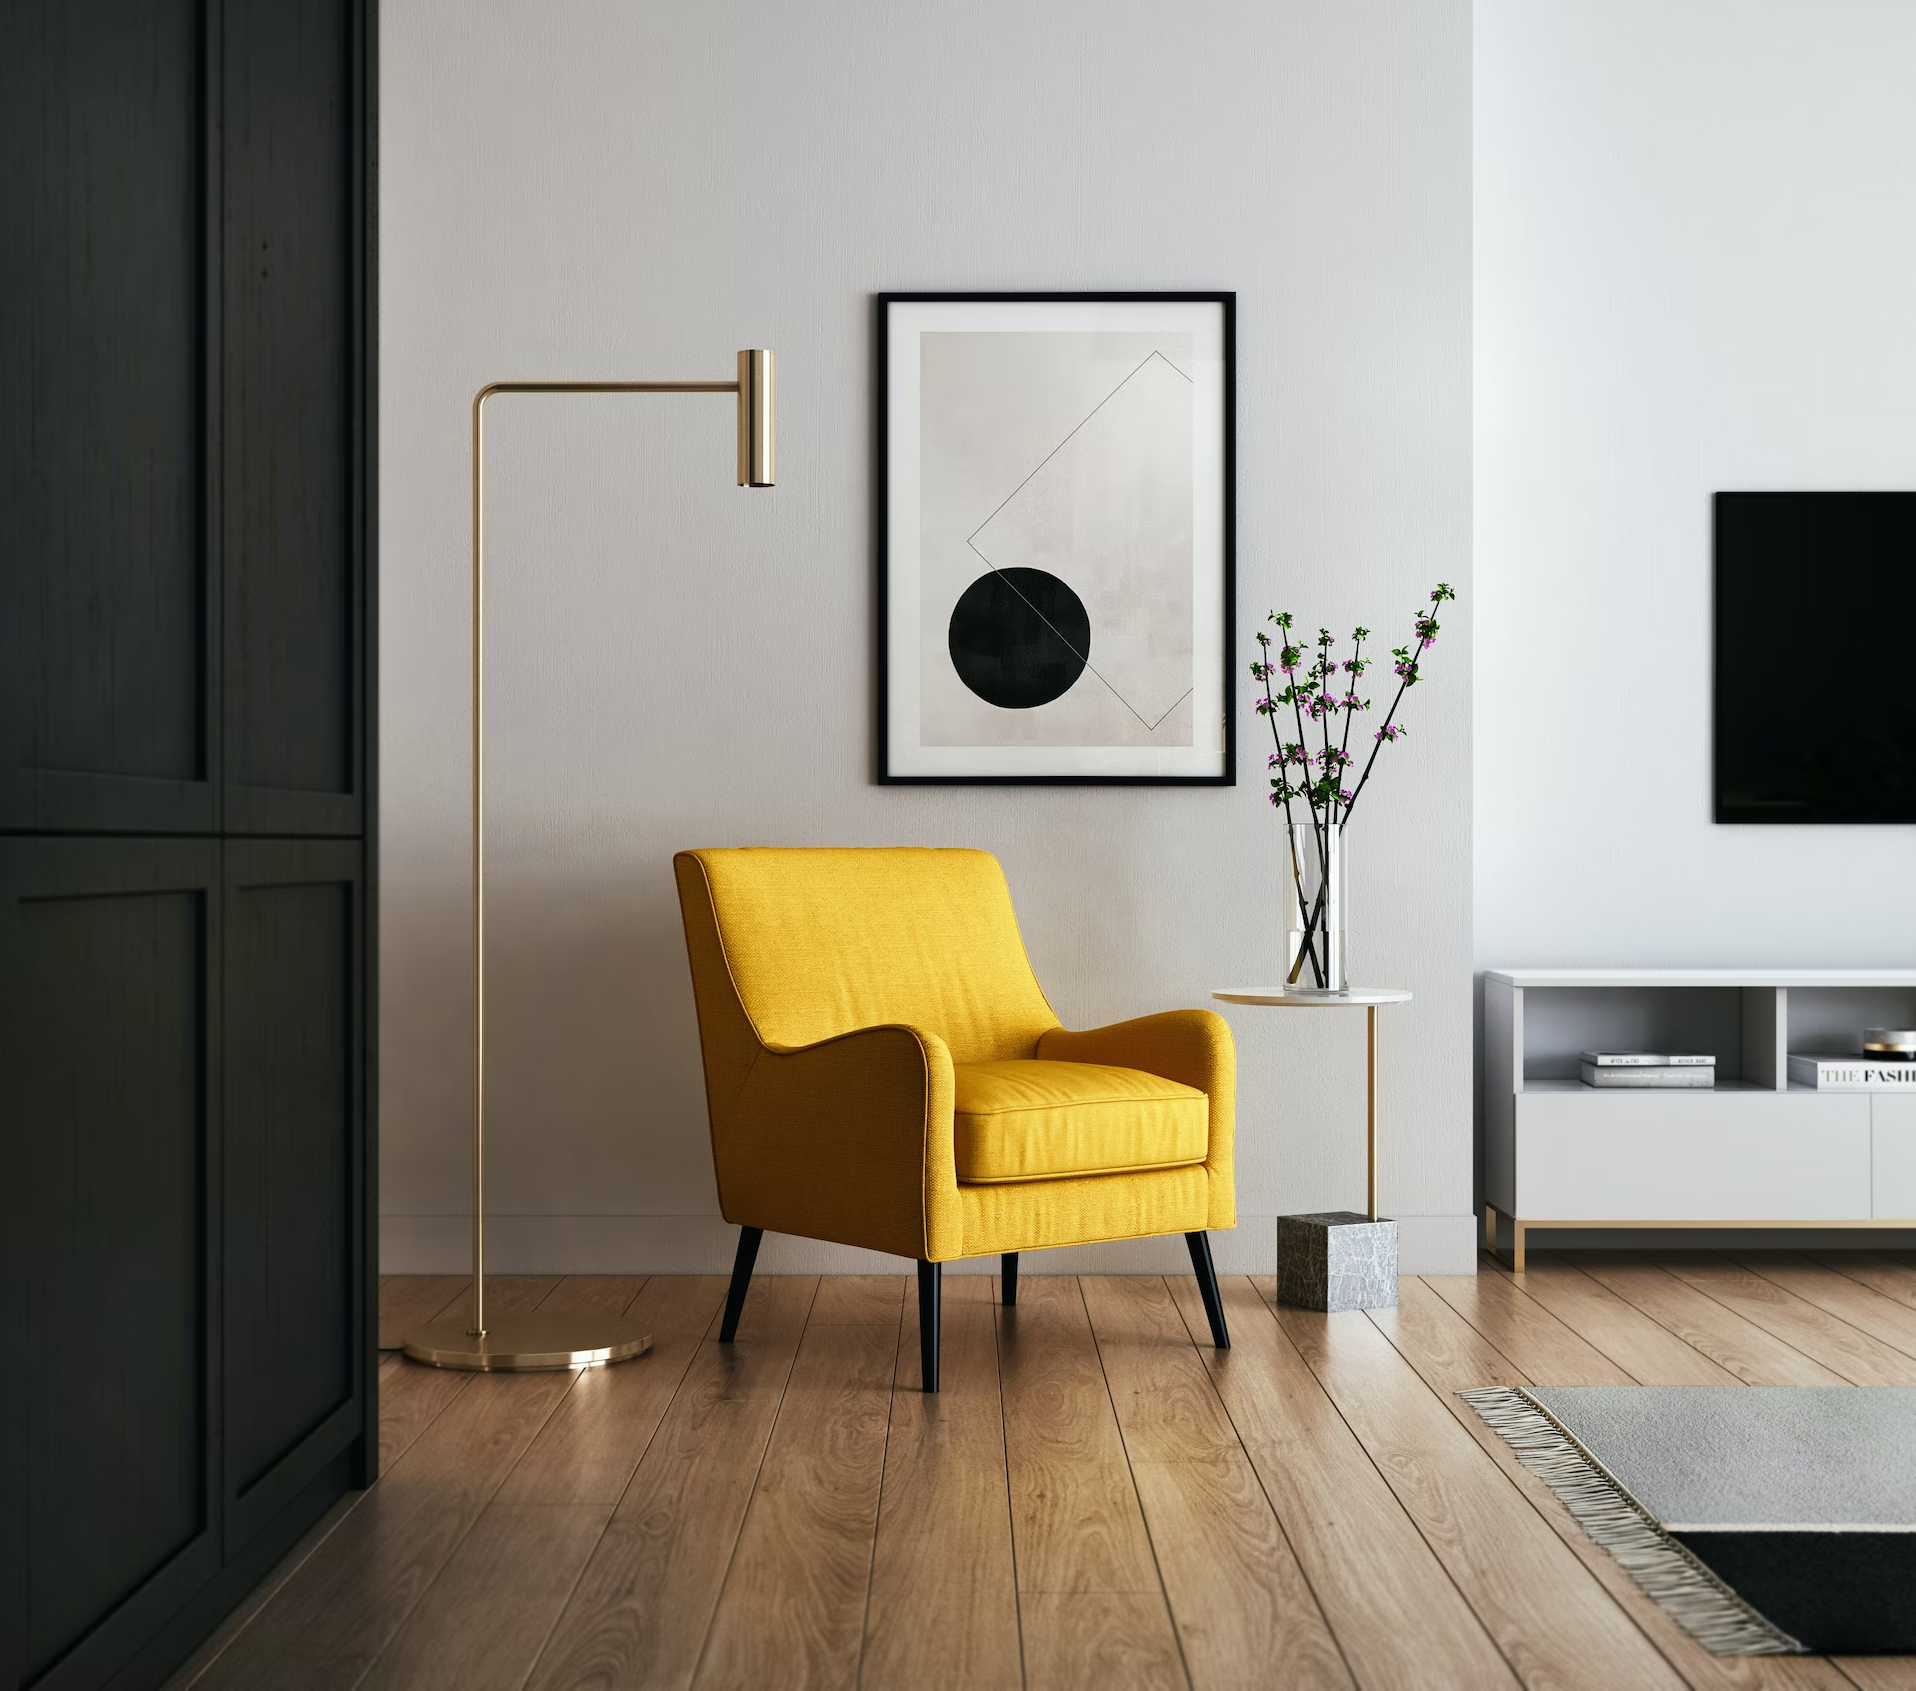 Home Interior with Yellow Chair by Kam Idris